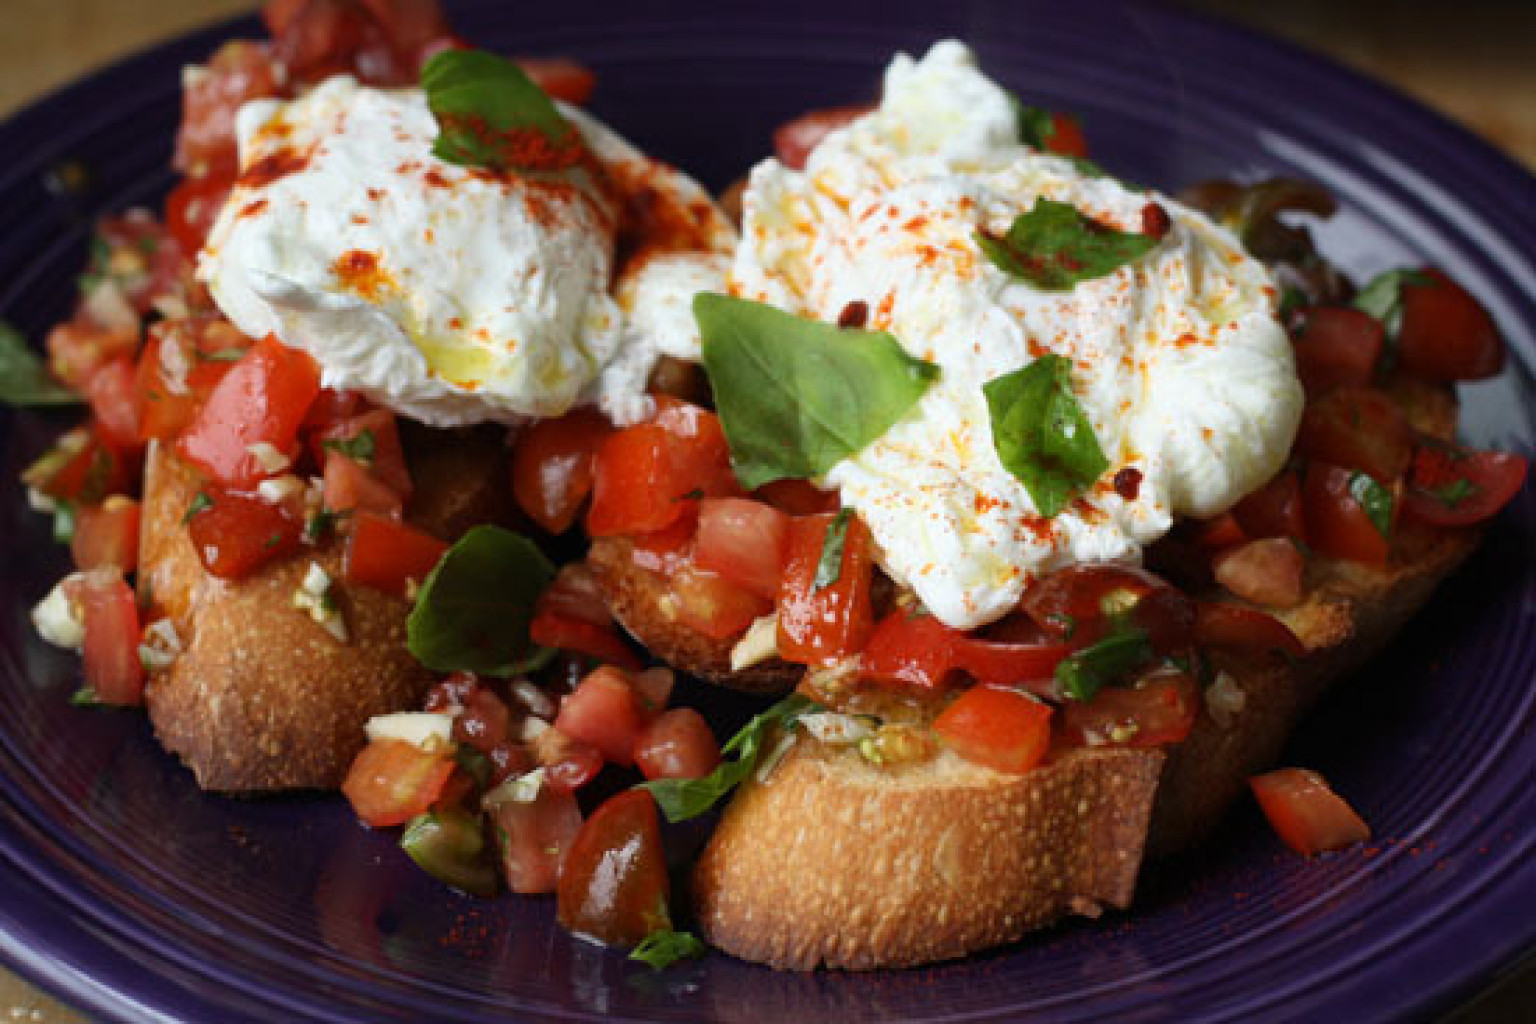 What is the difference between bruschetta and crostini?